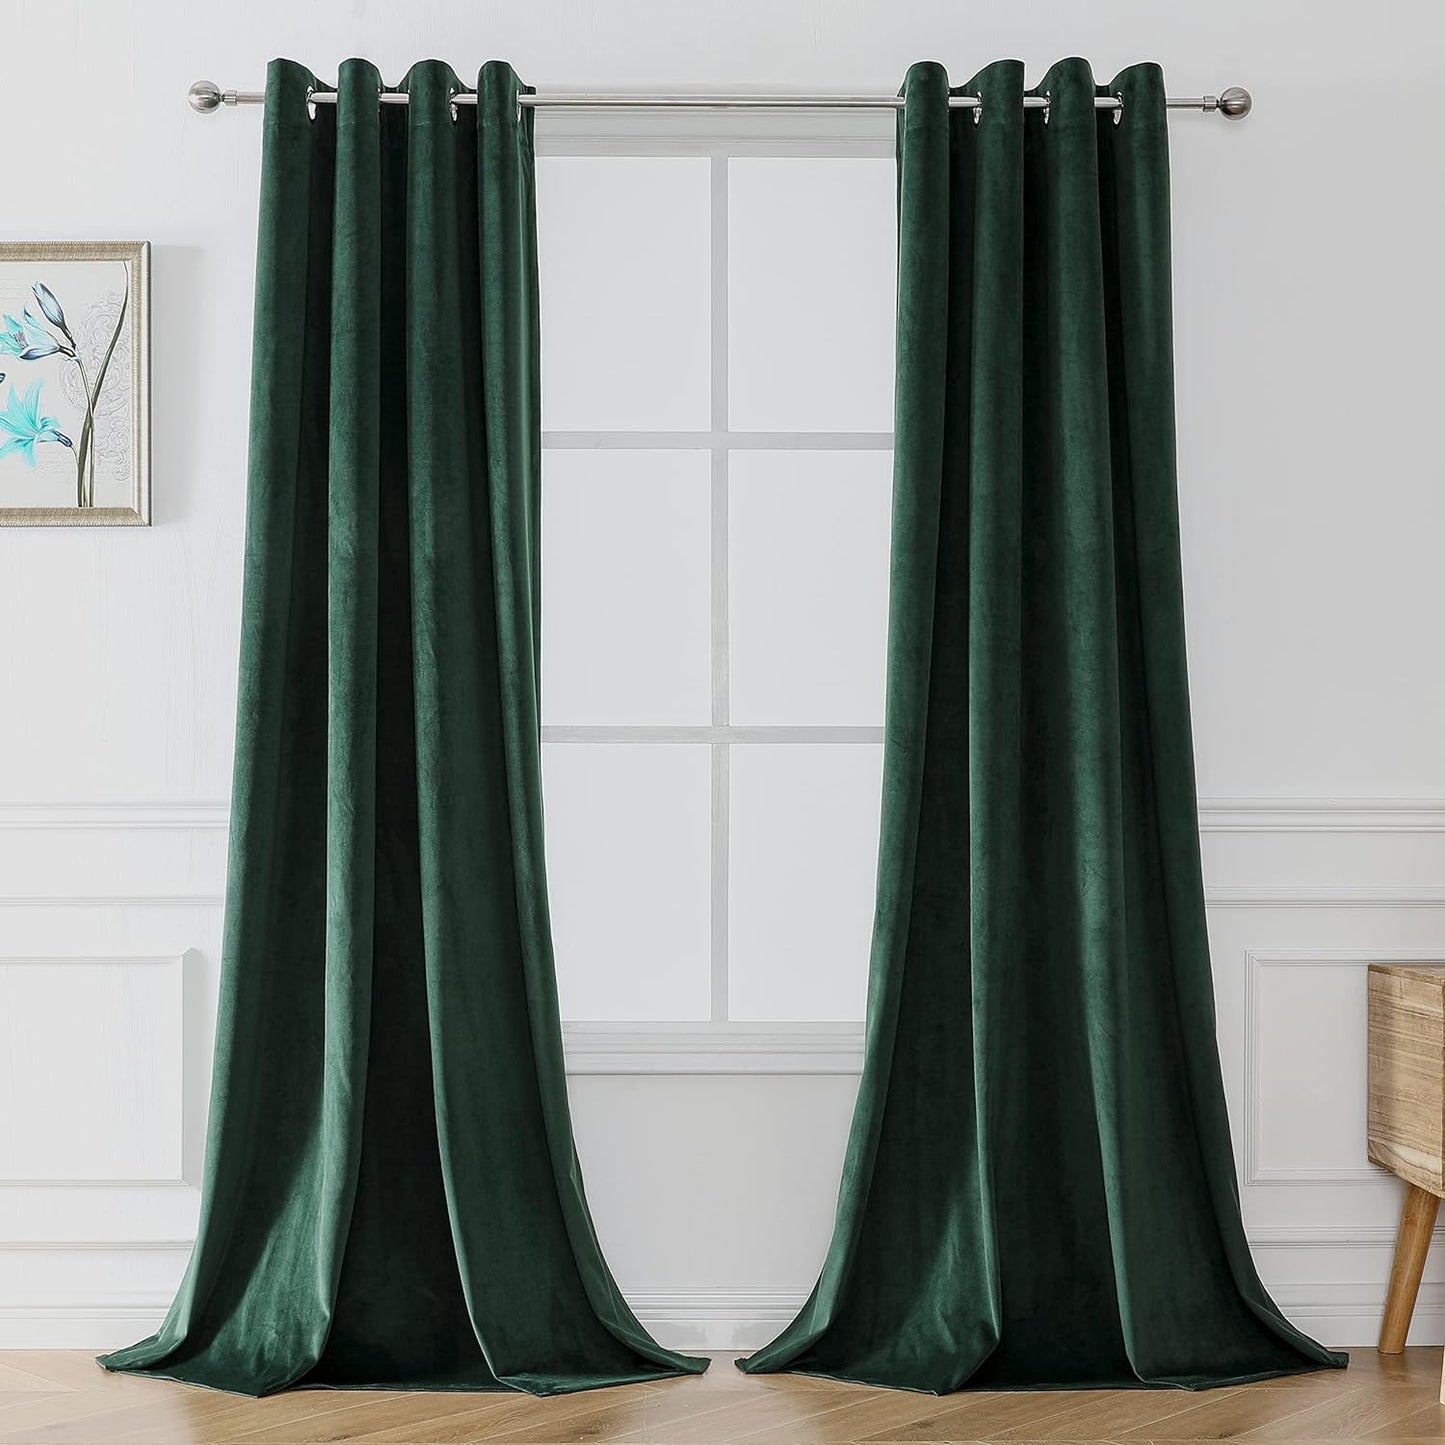 Victree Velvet Curtains for Bedroom, Blackout Curtains 52 X 84 Inch Length - Room Darkening Sun Light Blocking Grommet Window Drapes for Living Room, 2 Panels, Navy  Victree Dark Green 52 X 120 Inches 